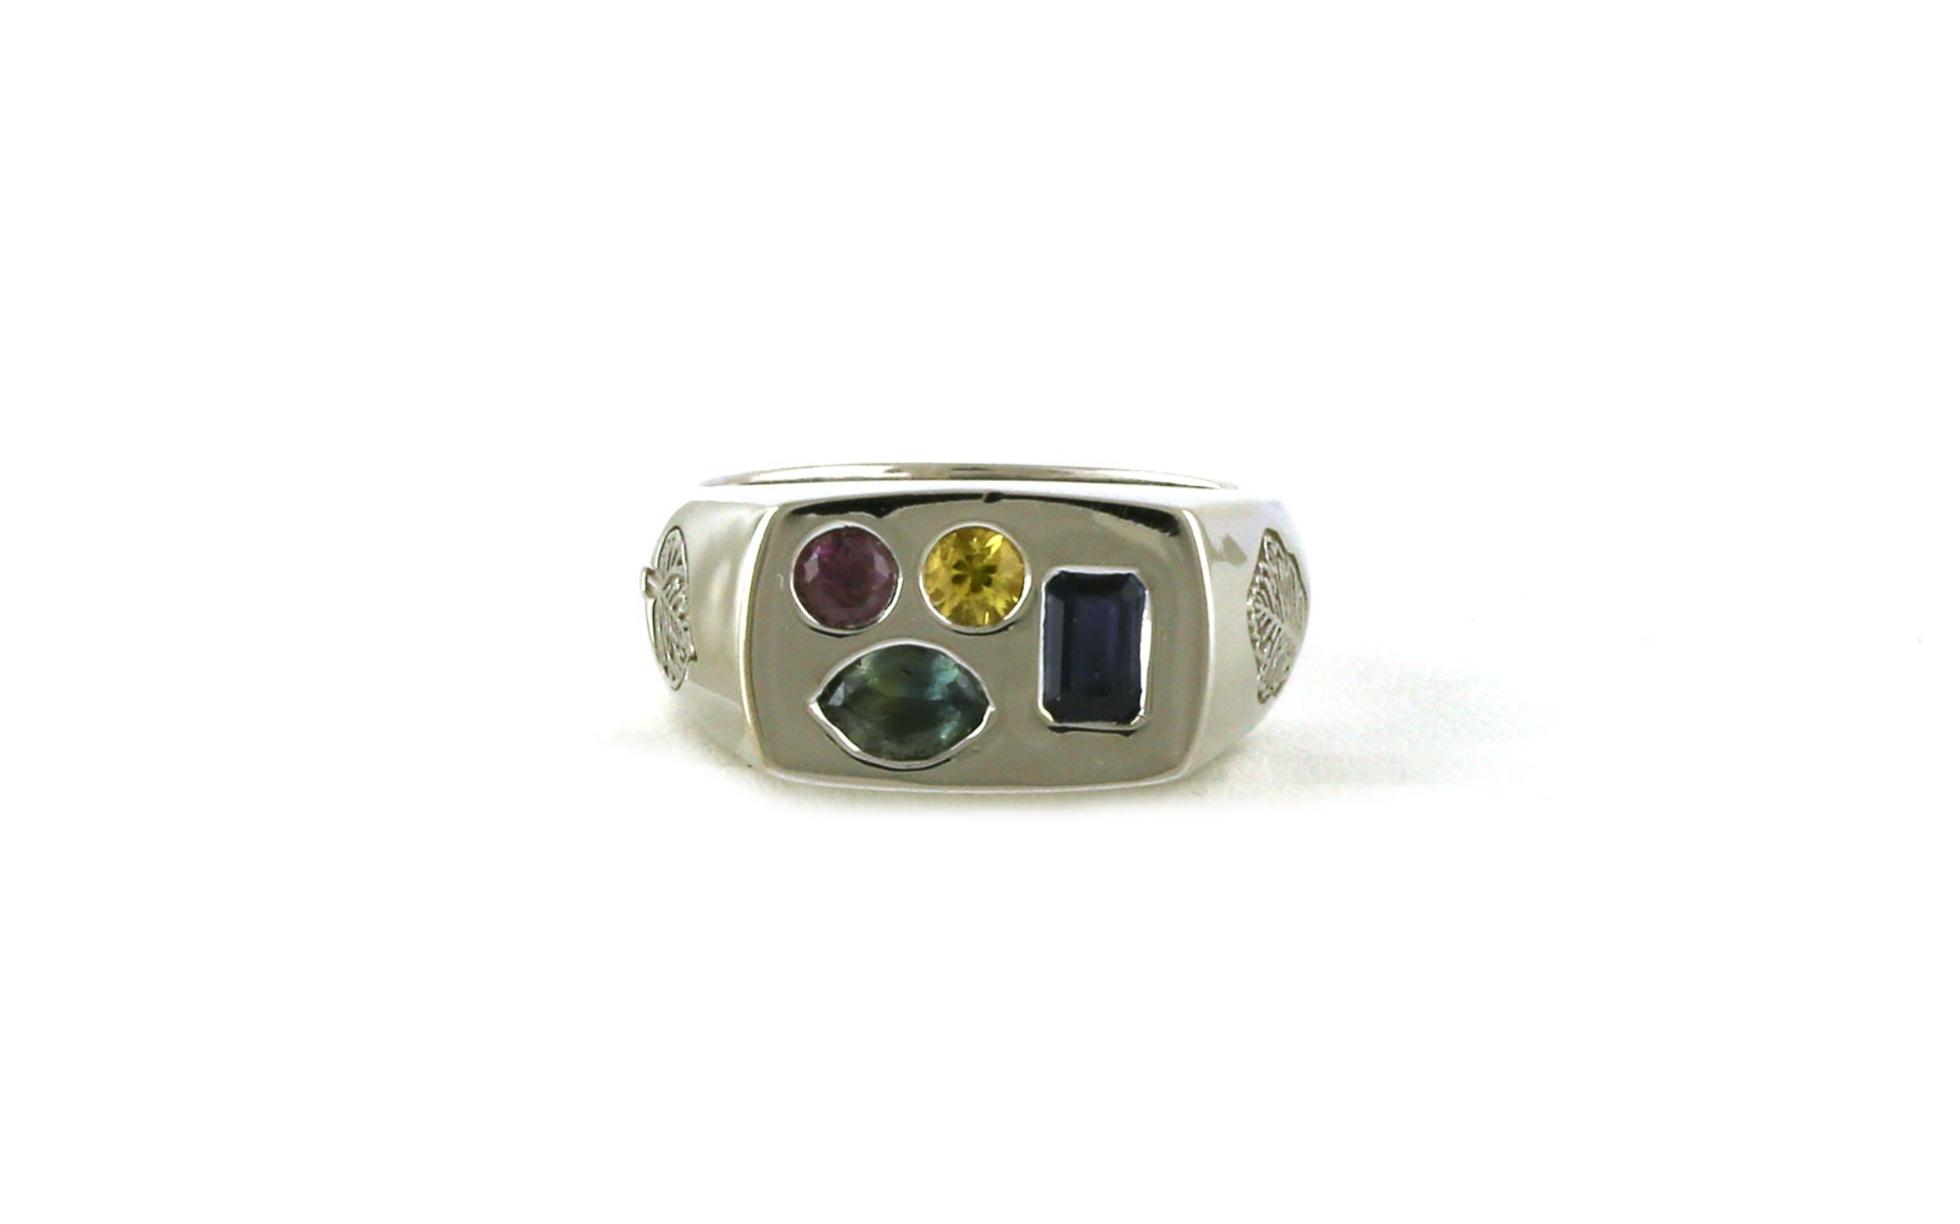 Estate Piece: 4-Stone Montana Yogo Sapphire and Montana Sapphire Signet Ring with Leaves and Old Faithfull Engraving in White Gold